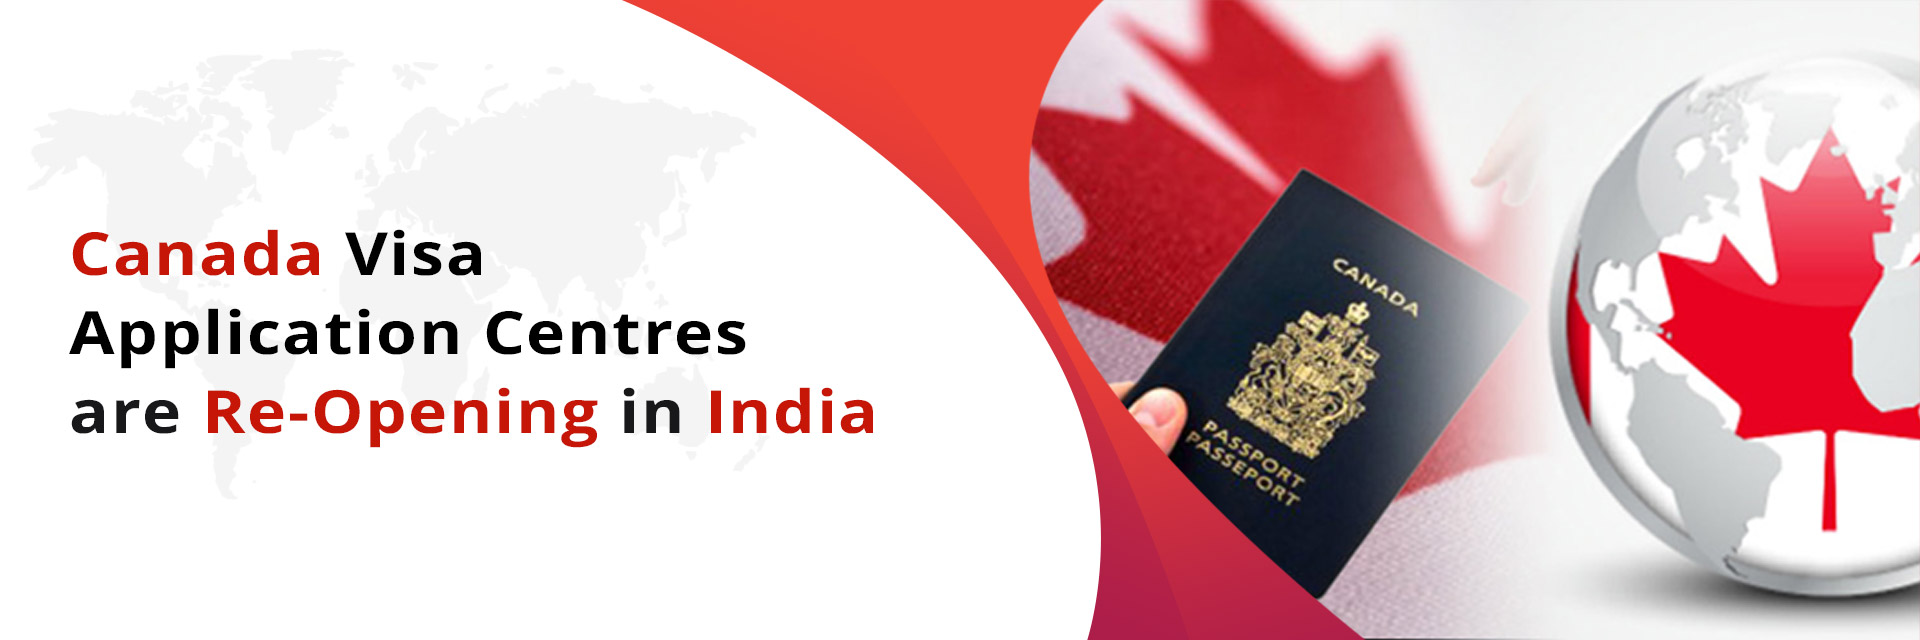 Canada Visa Application Centres re-opens in India